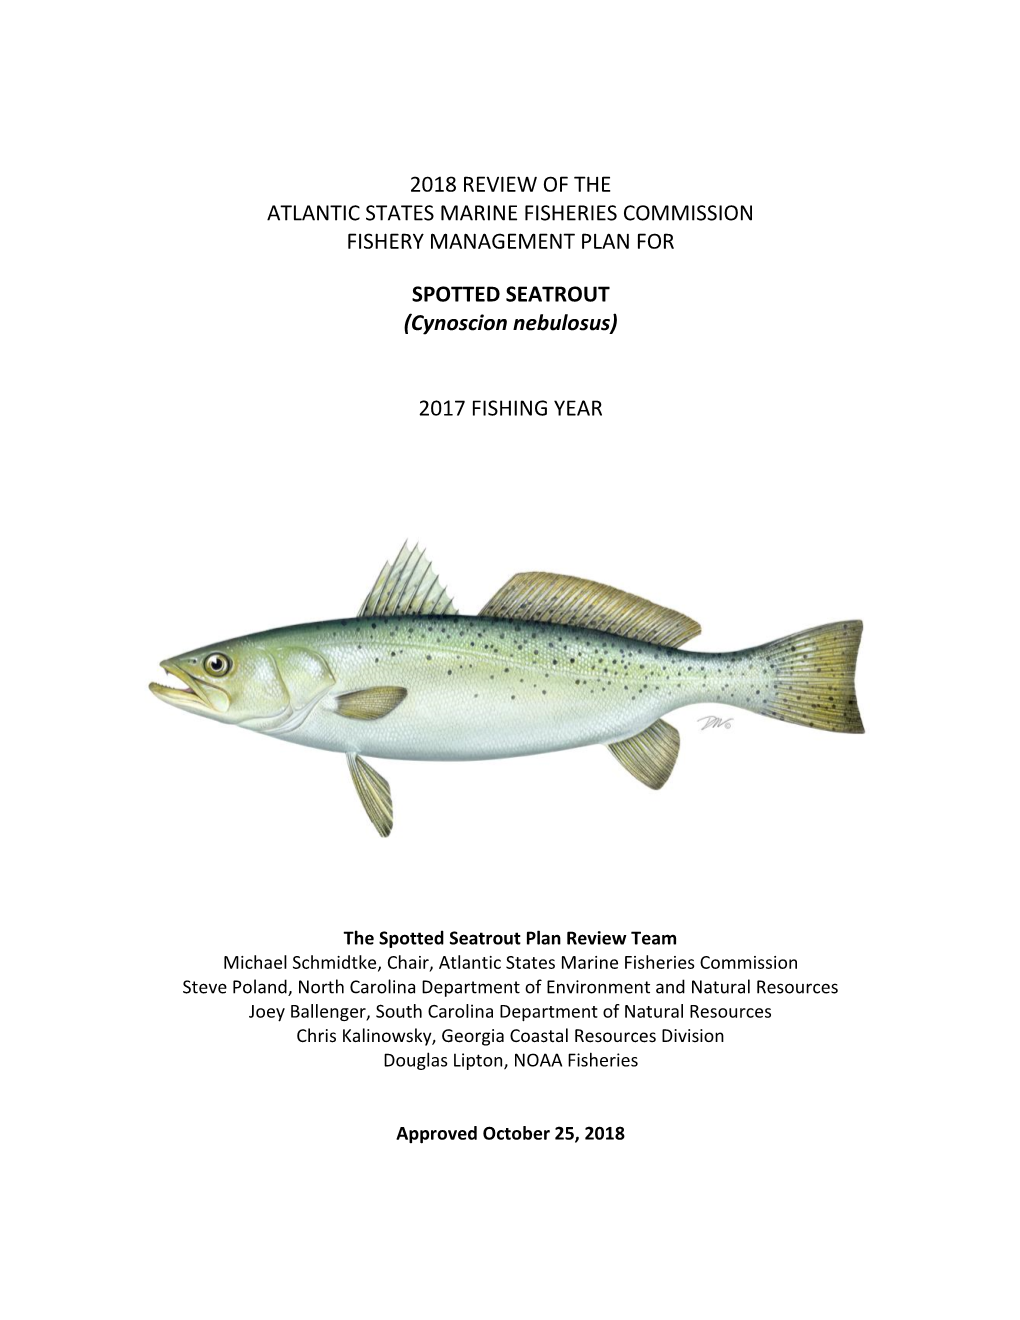 2018 Review of the Atlantic States Marine Fisheries Commission Fishery Management Plan For